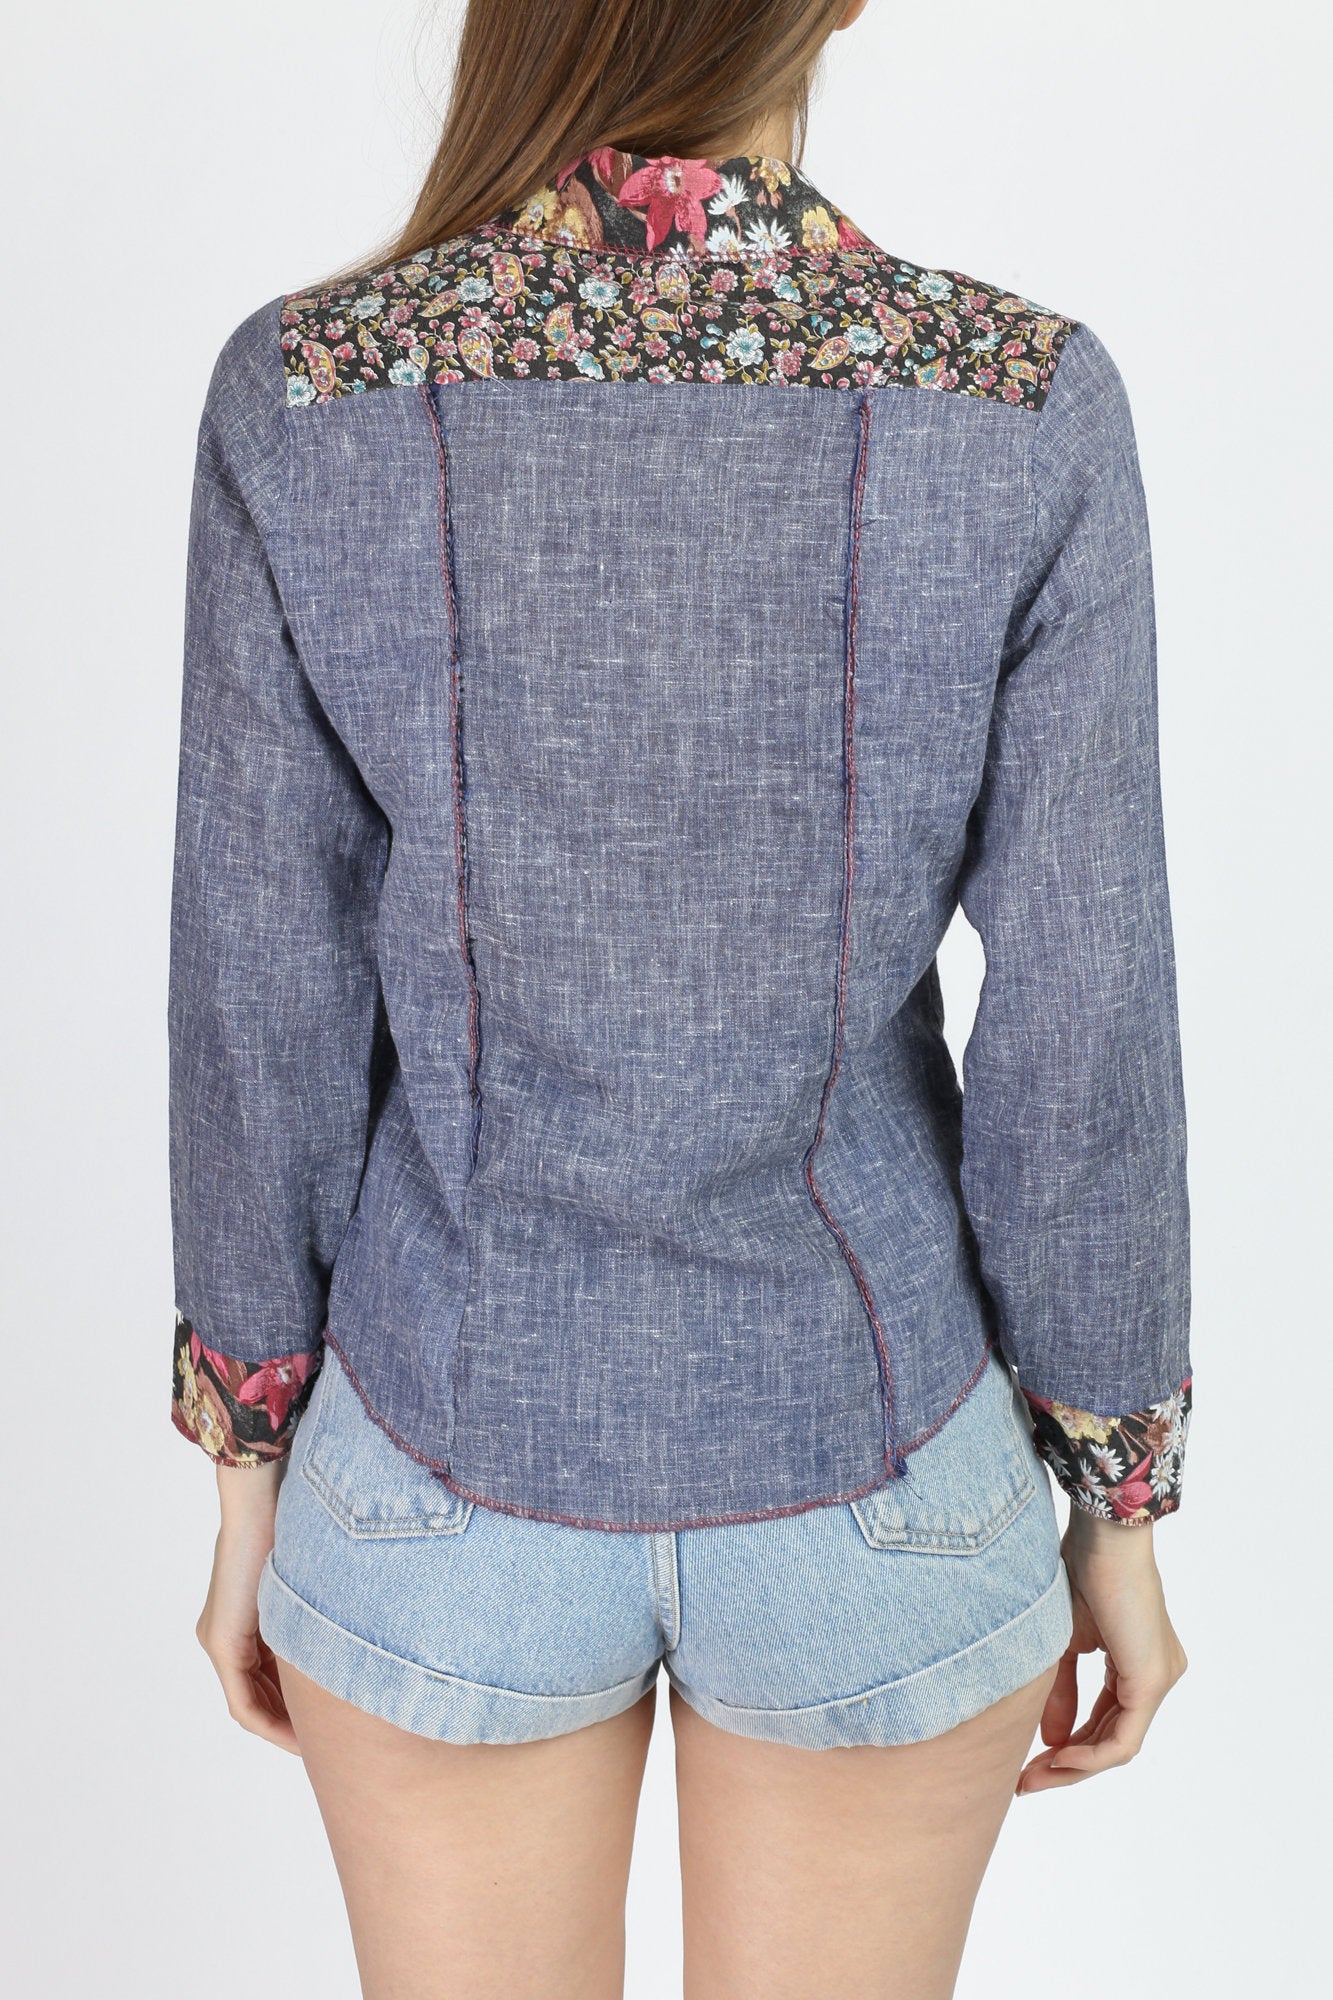 70s Floral Chambray Blouse - Small